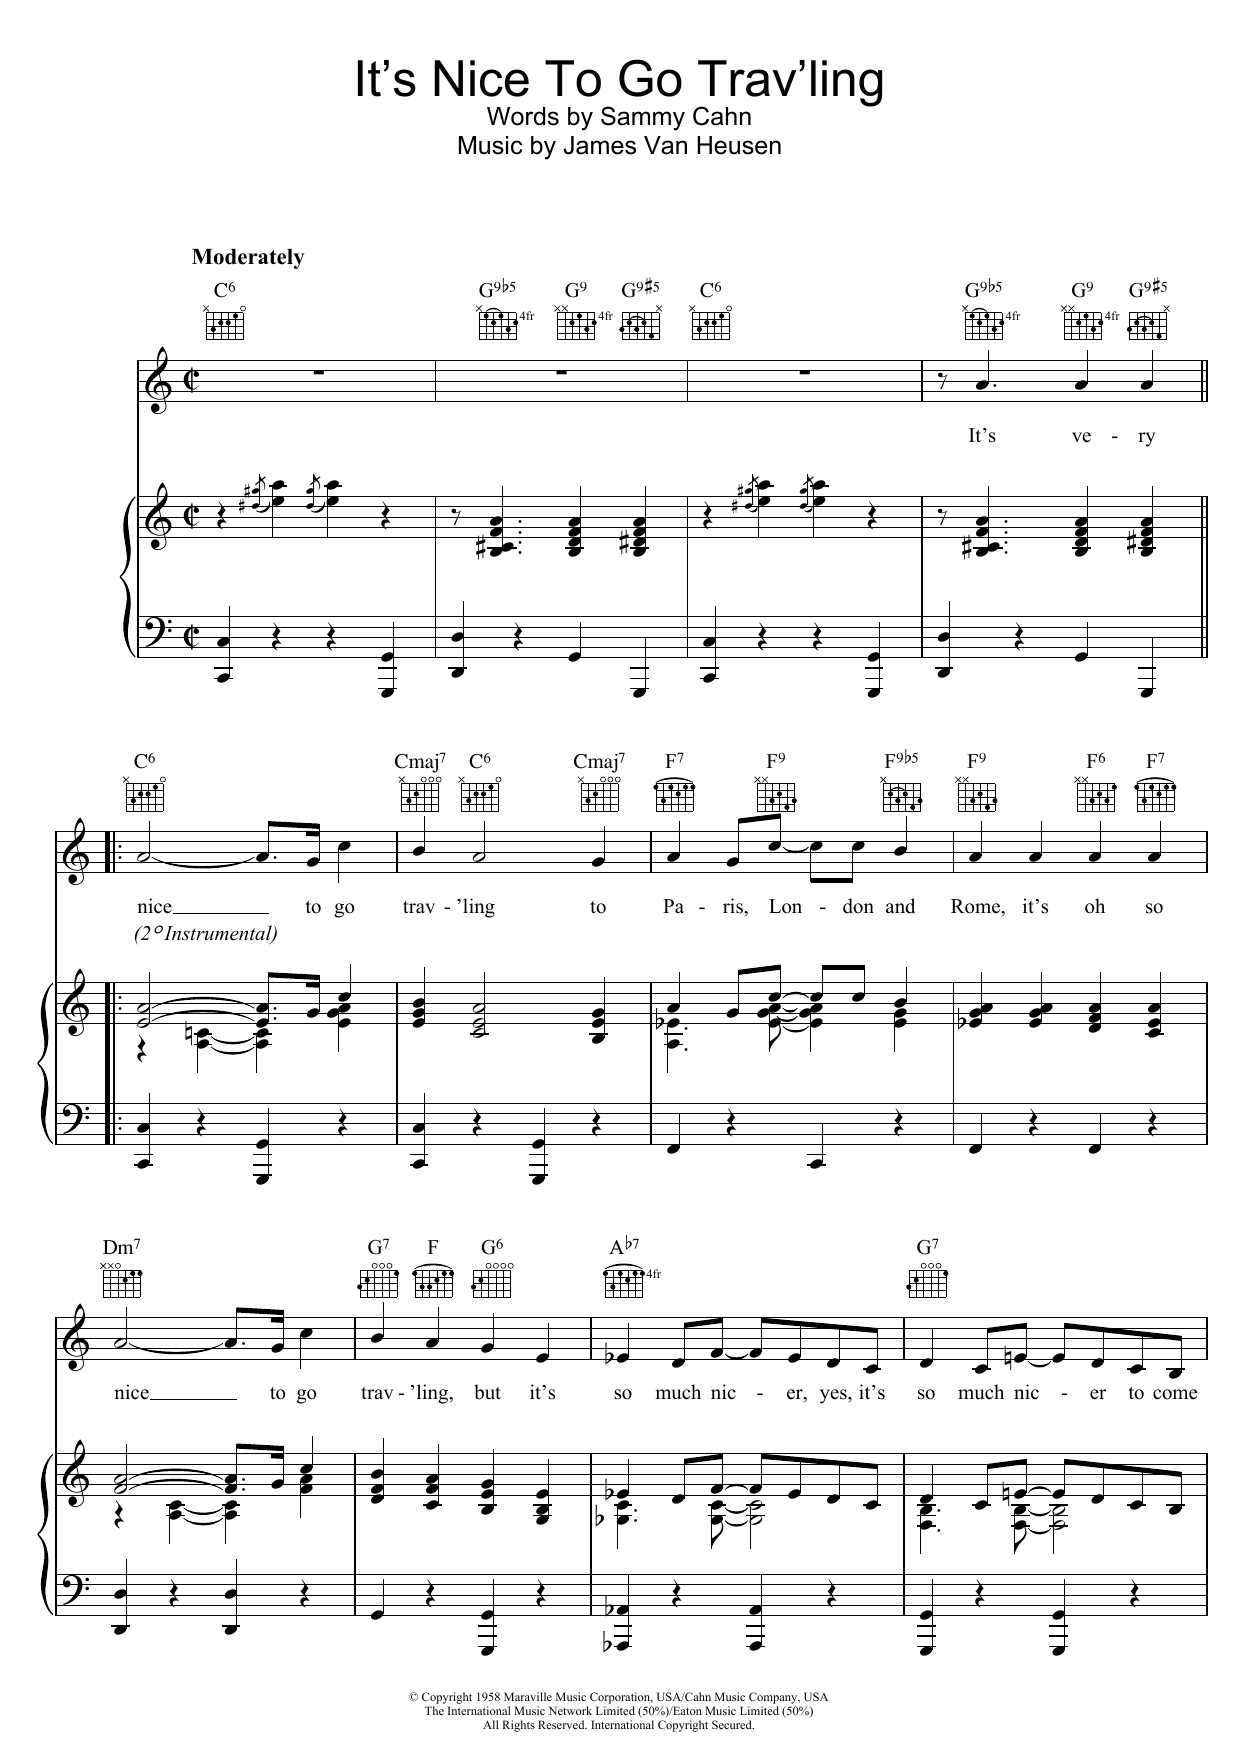 Download Frank Sinatra It's Nice To Go Trav'ling Sheet Music